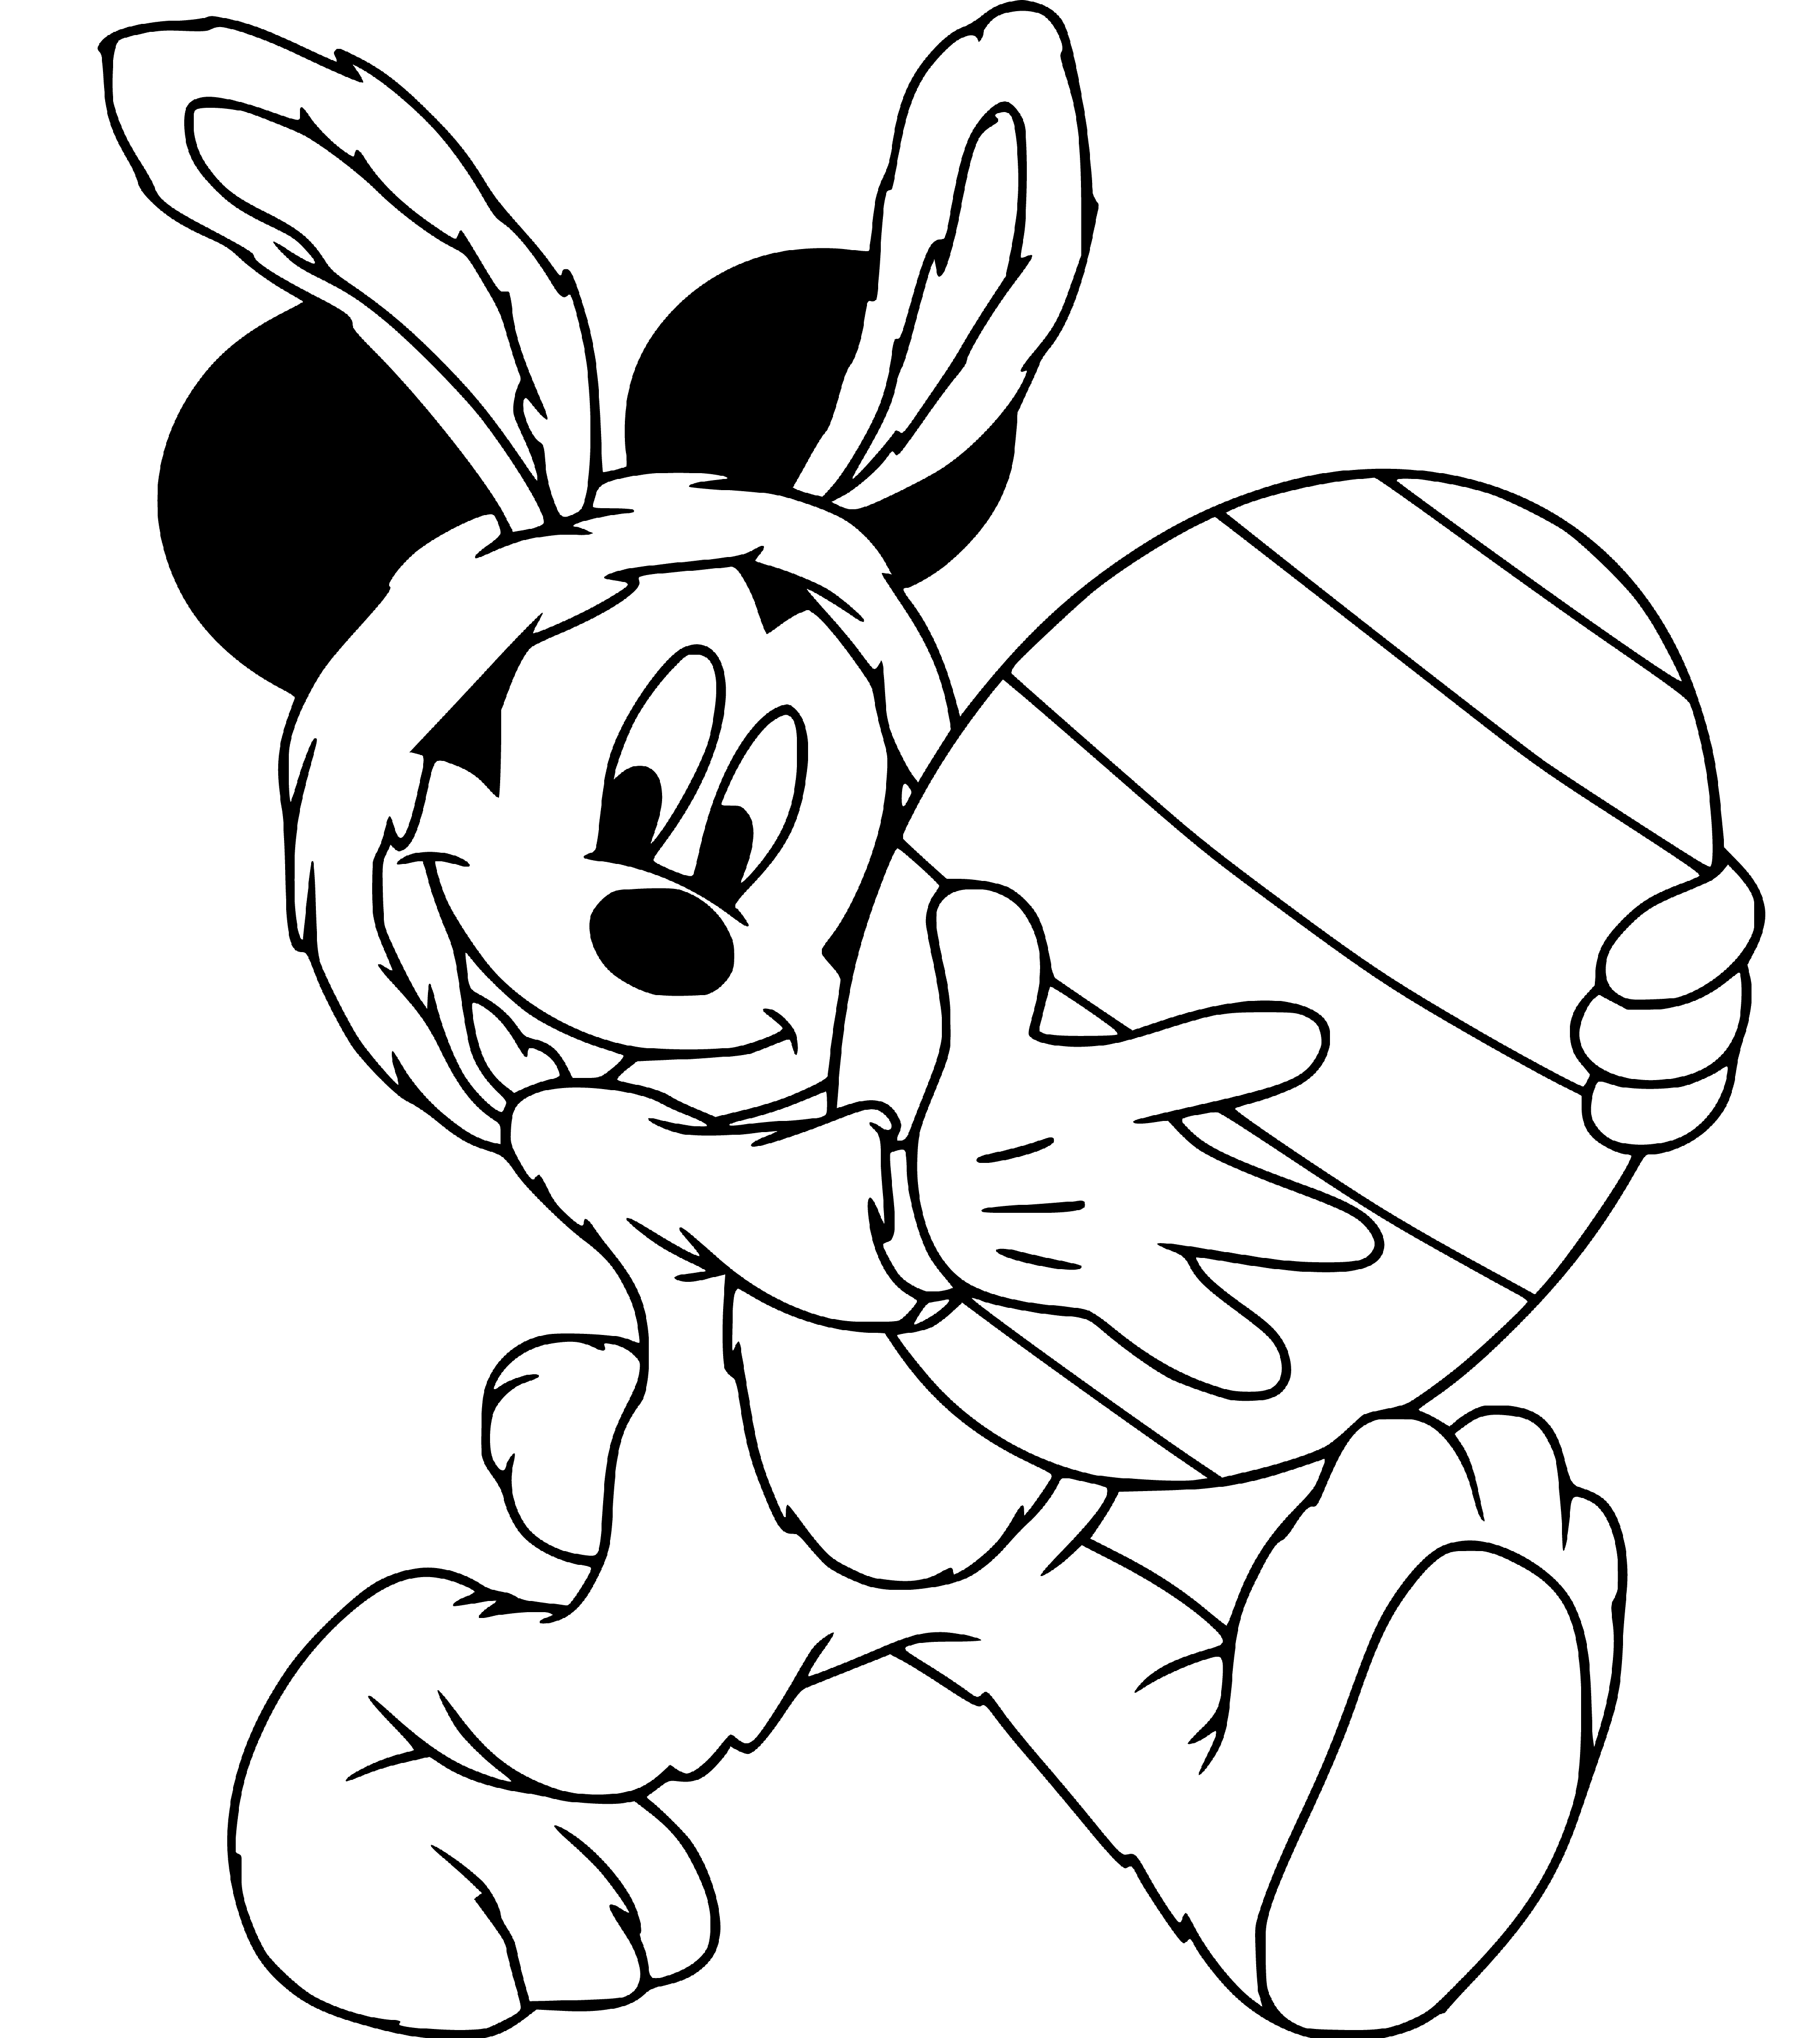 Printable Mickey holding an Easter egg Coloring Page for kids.